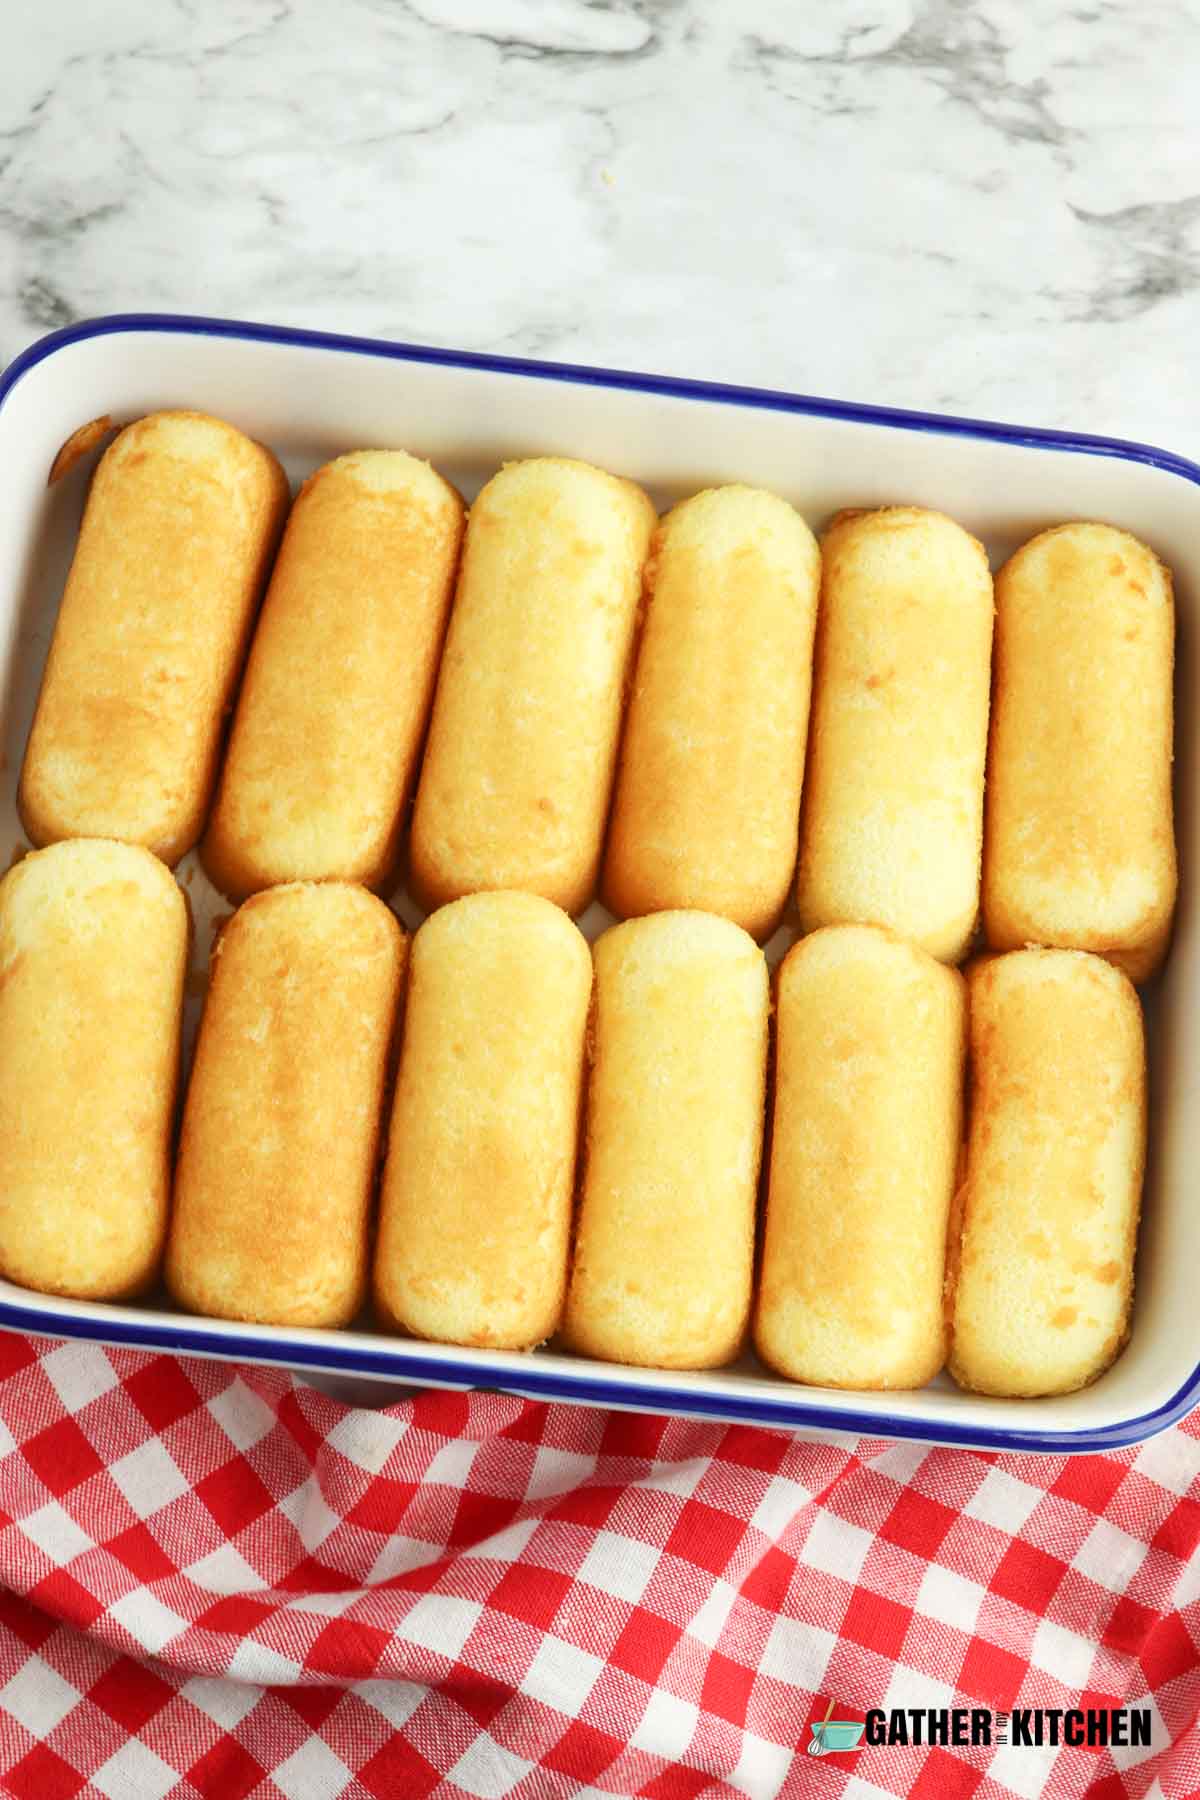 Baking dish with Twinkies on the bottom.